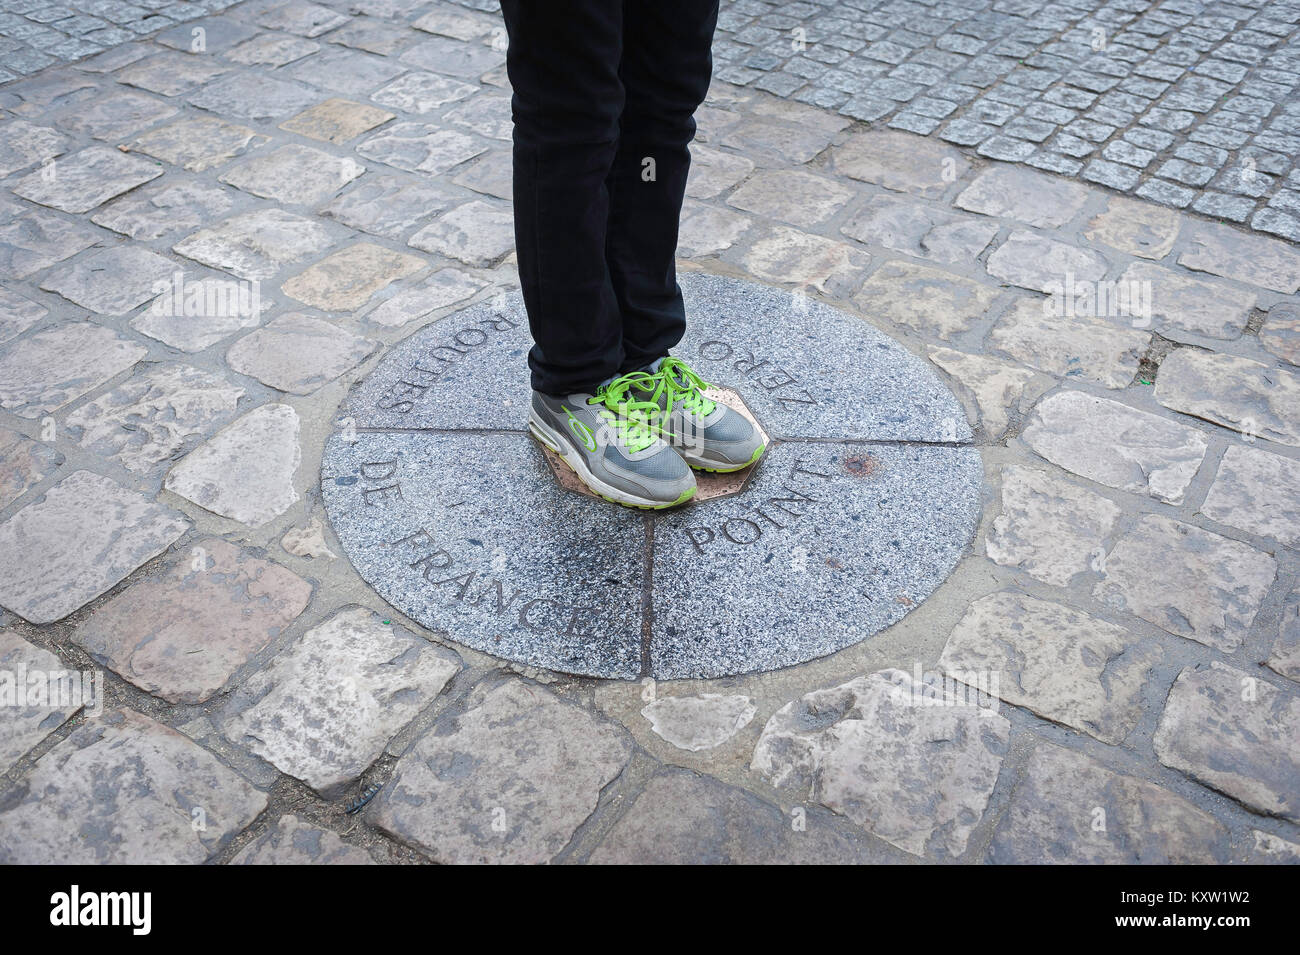 Point Zero Paris, a young person stands on Point Zero - the precise spot from which all distances from Paris to other locations in France is measured. Stock Photo